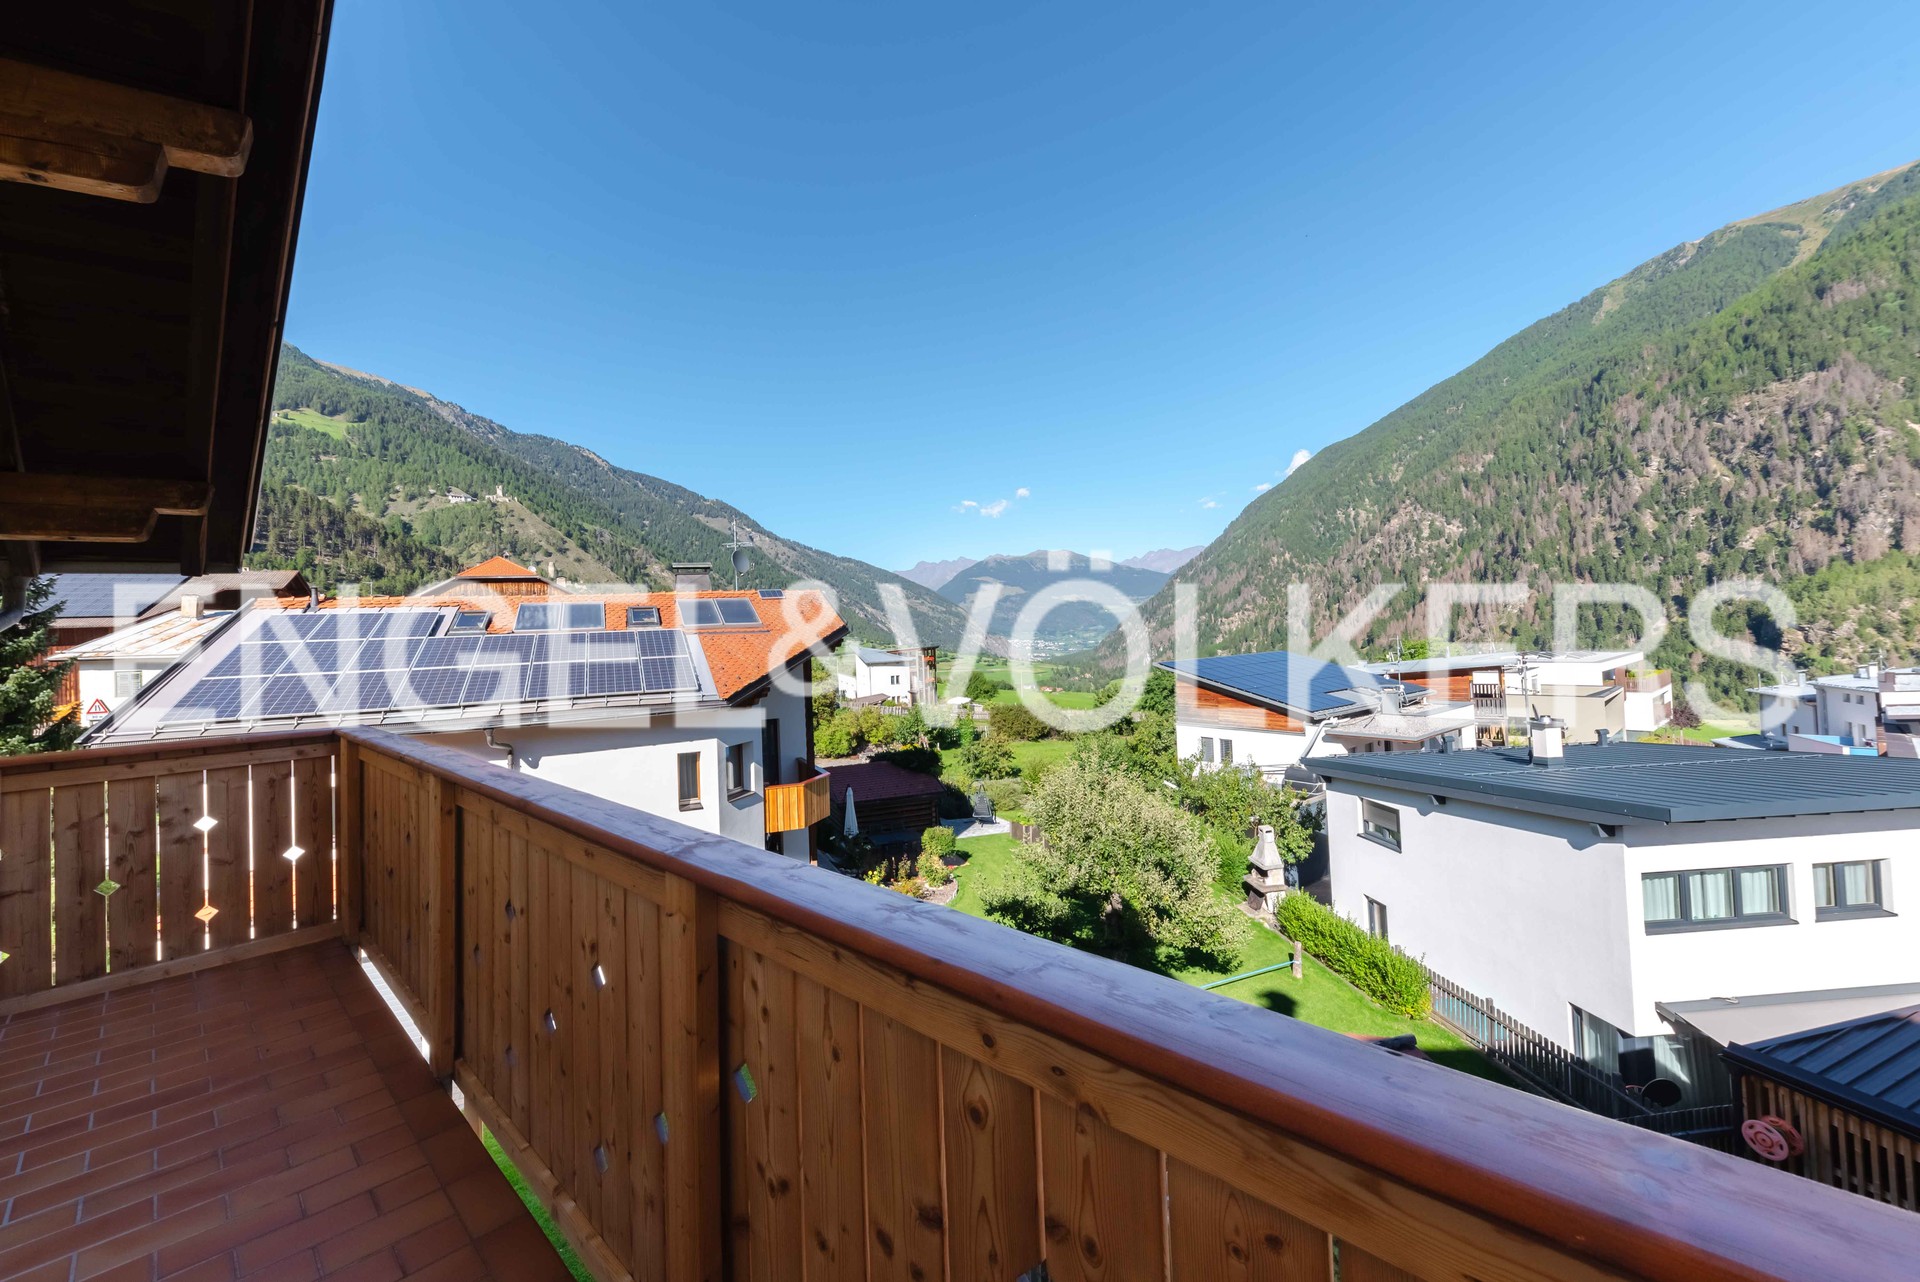 House in Taufers im Münstertal - Balcony with view